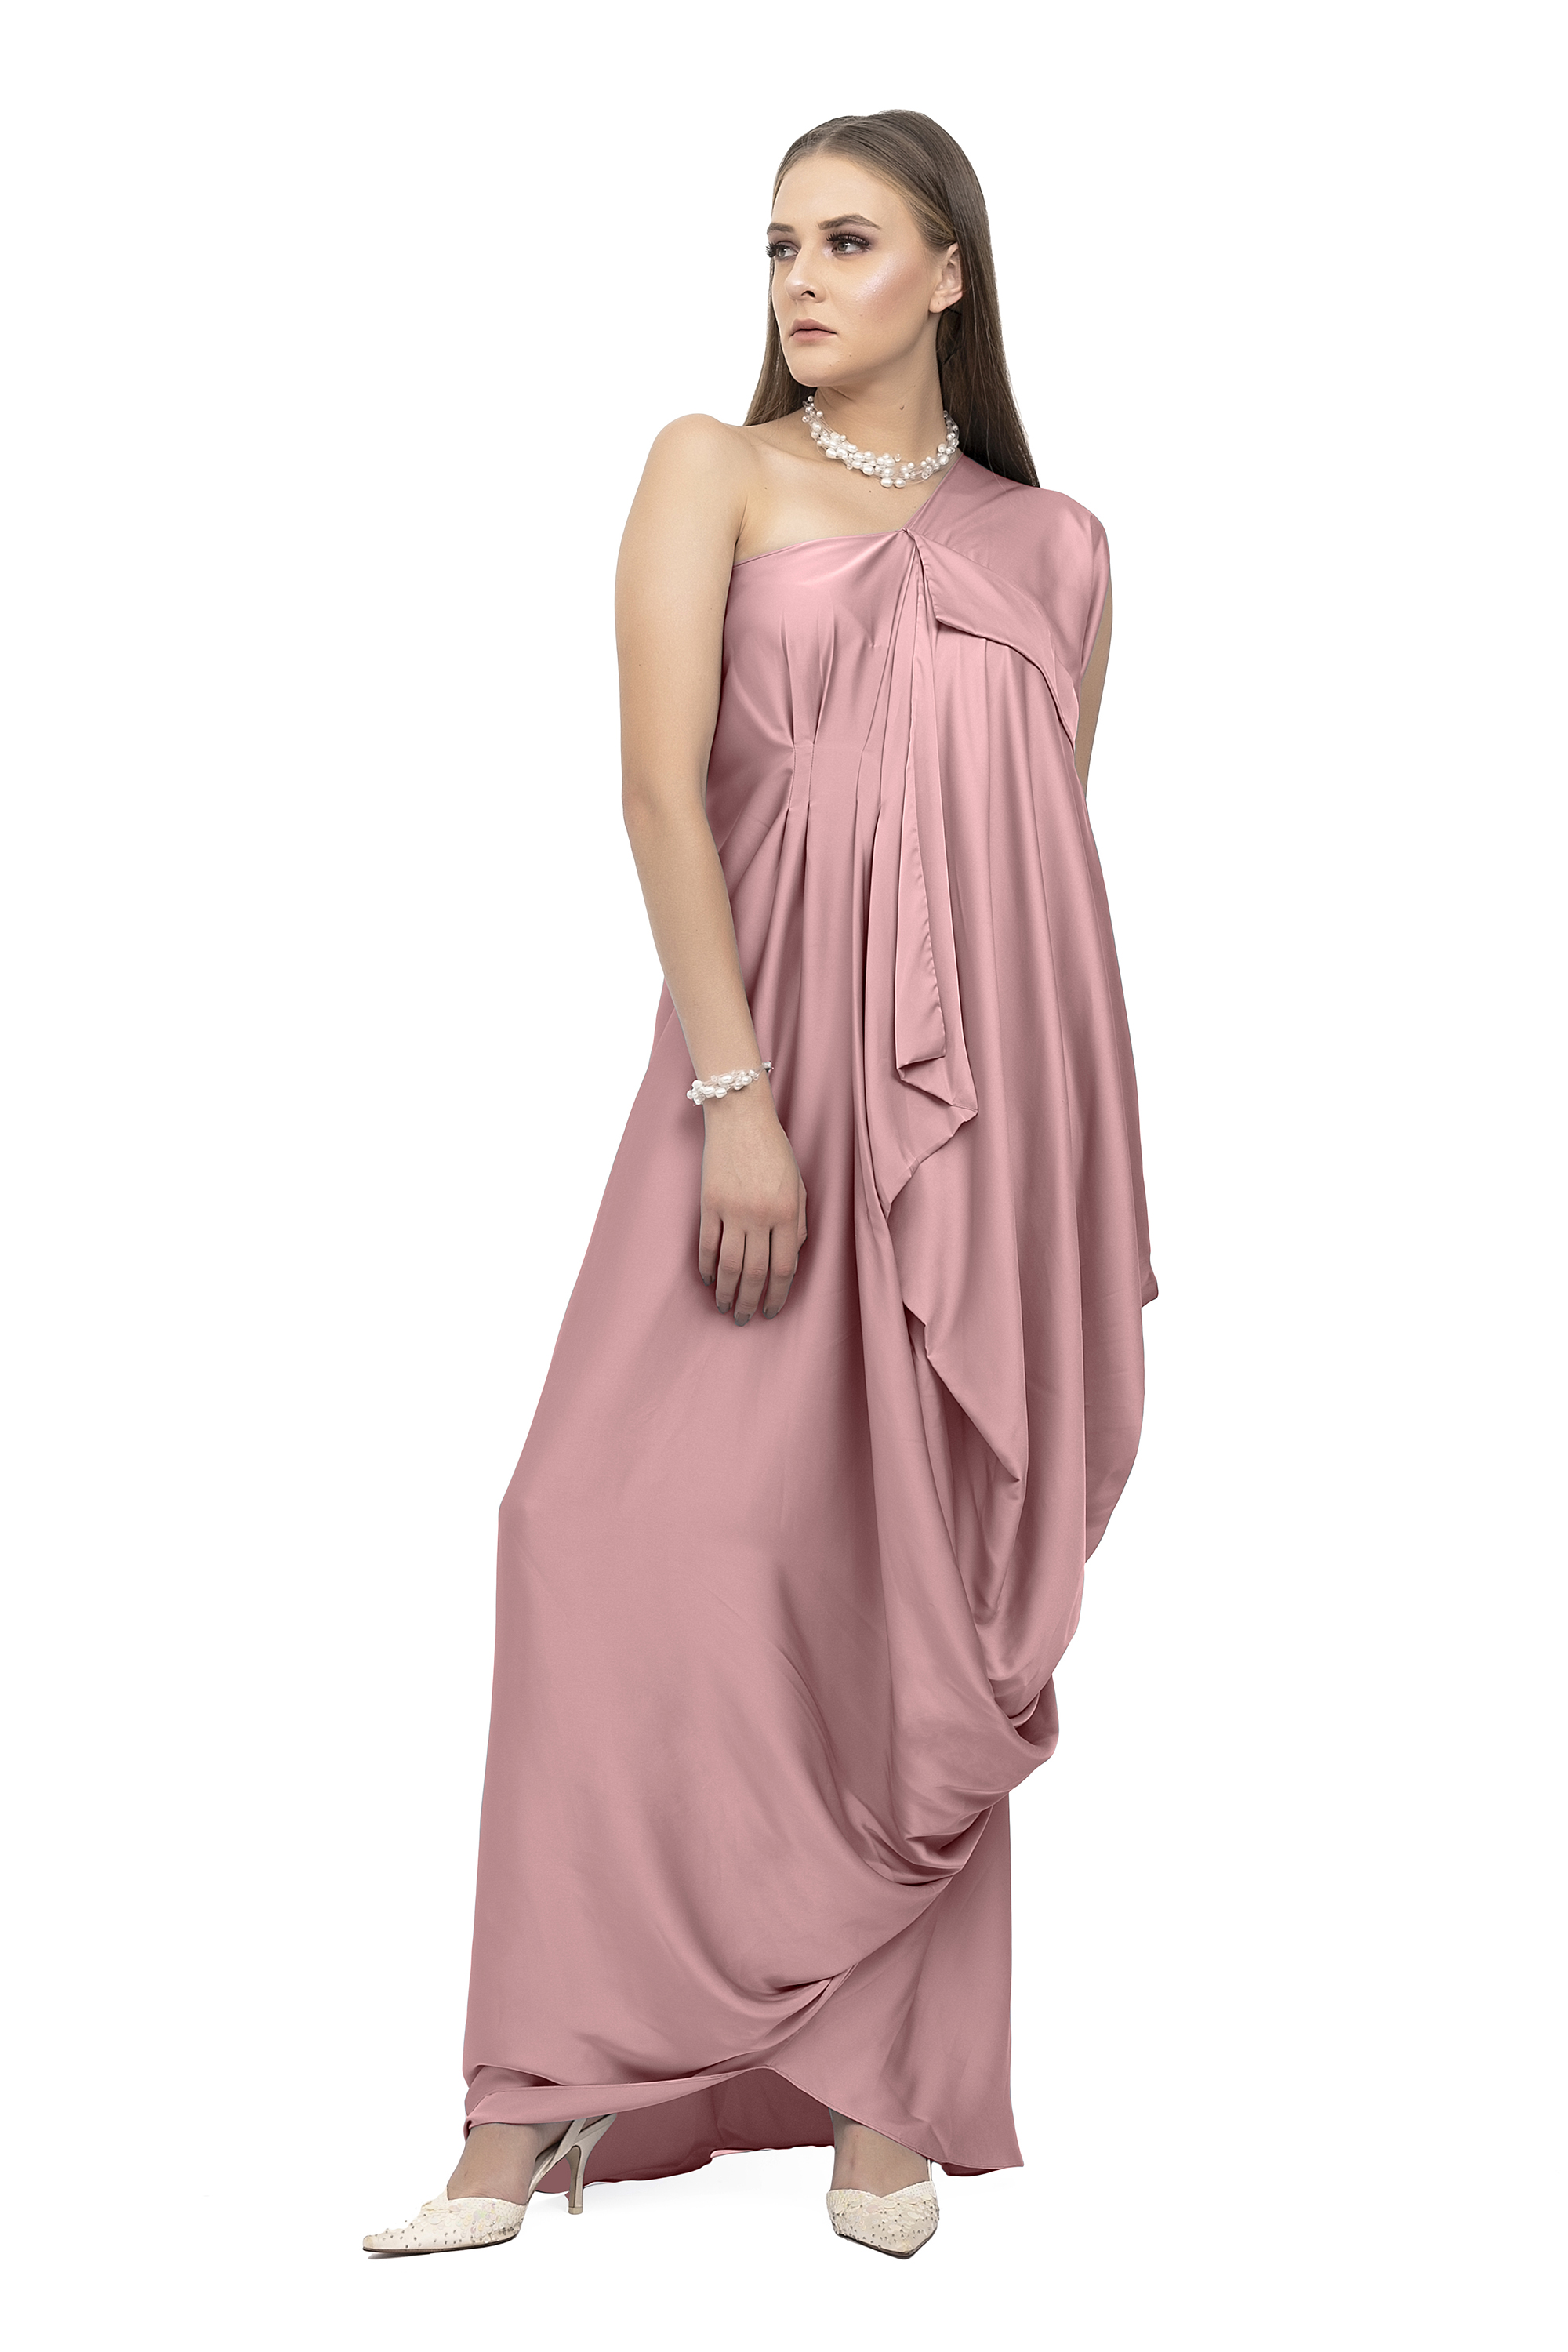 Dull Pink Draped Dress One Shoulder Draped Gown